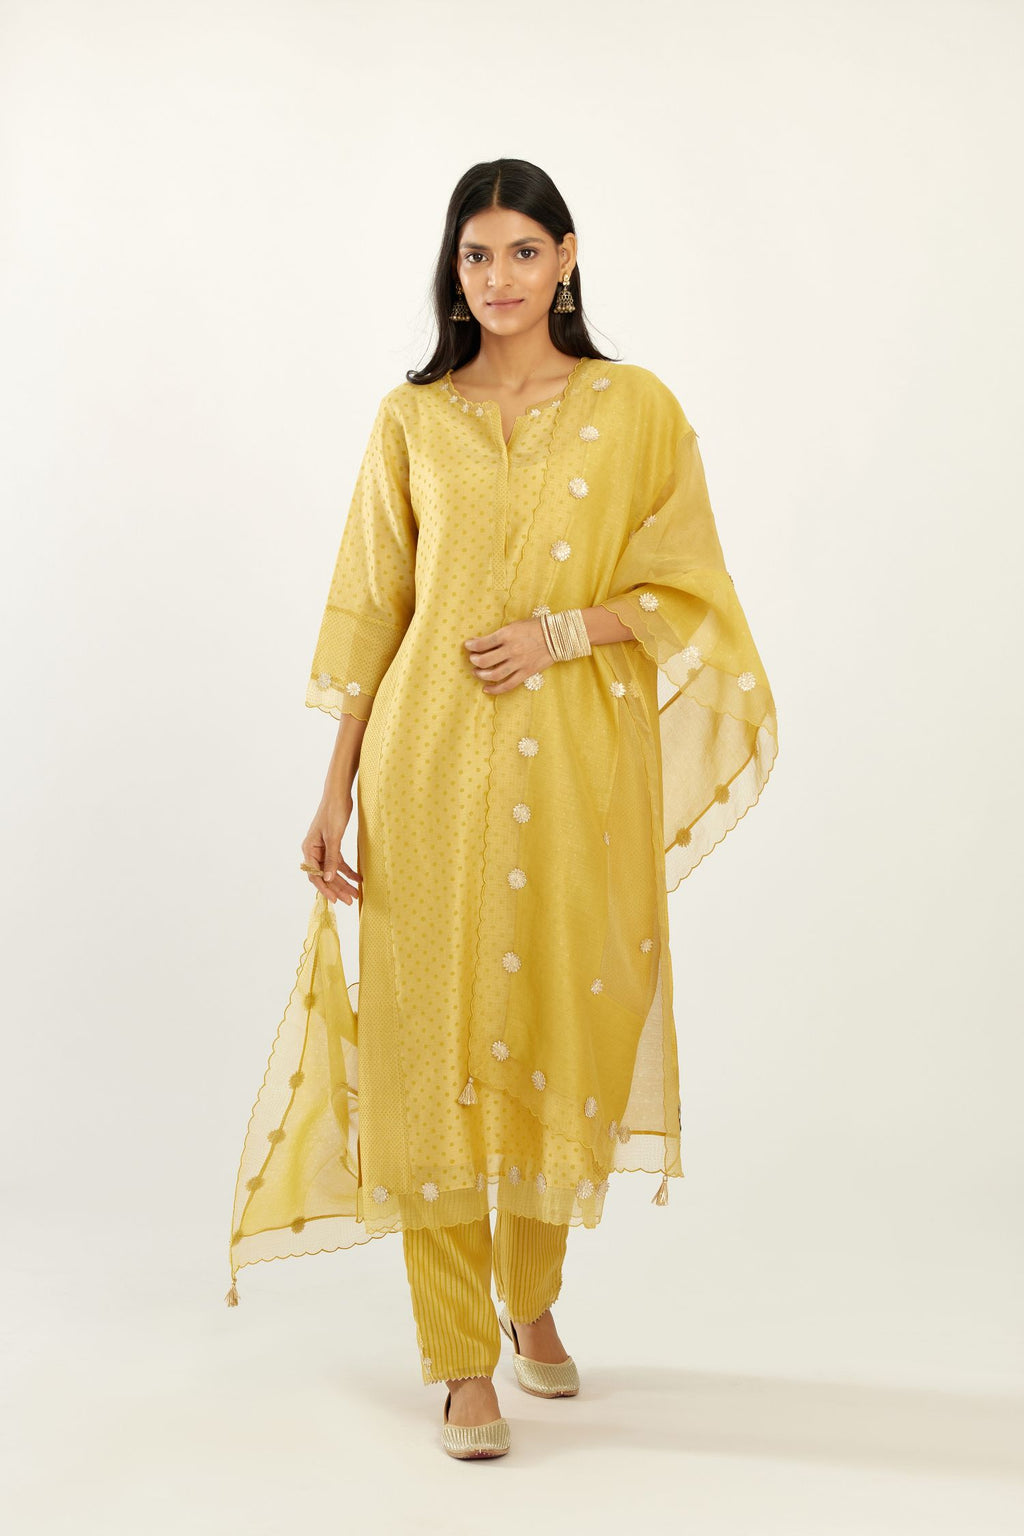 Yellow hand block printed narrow dupatta, highlighted with all-over gota flower and organza scalloped edges.